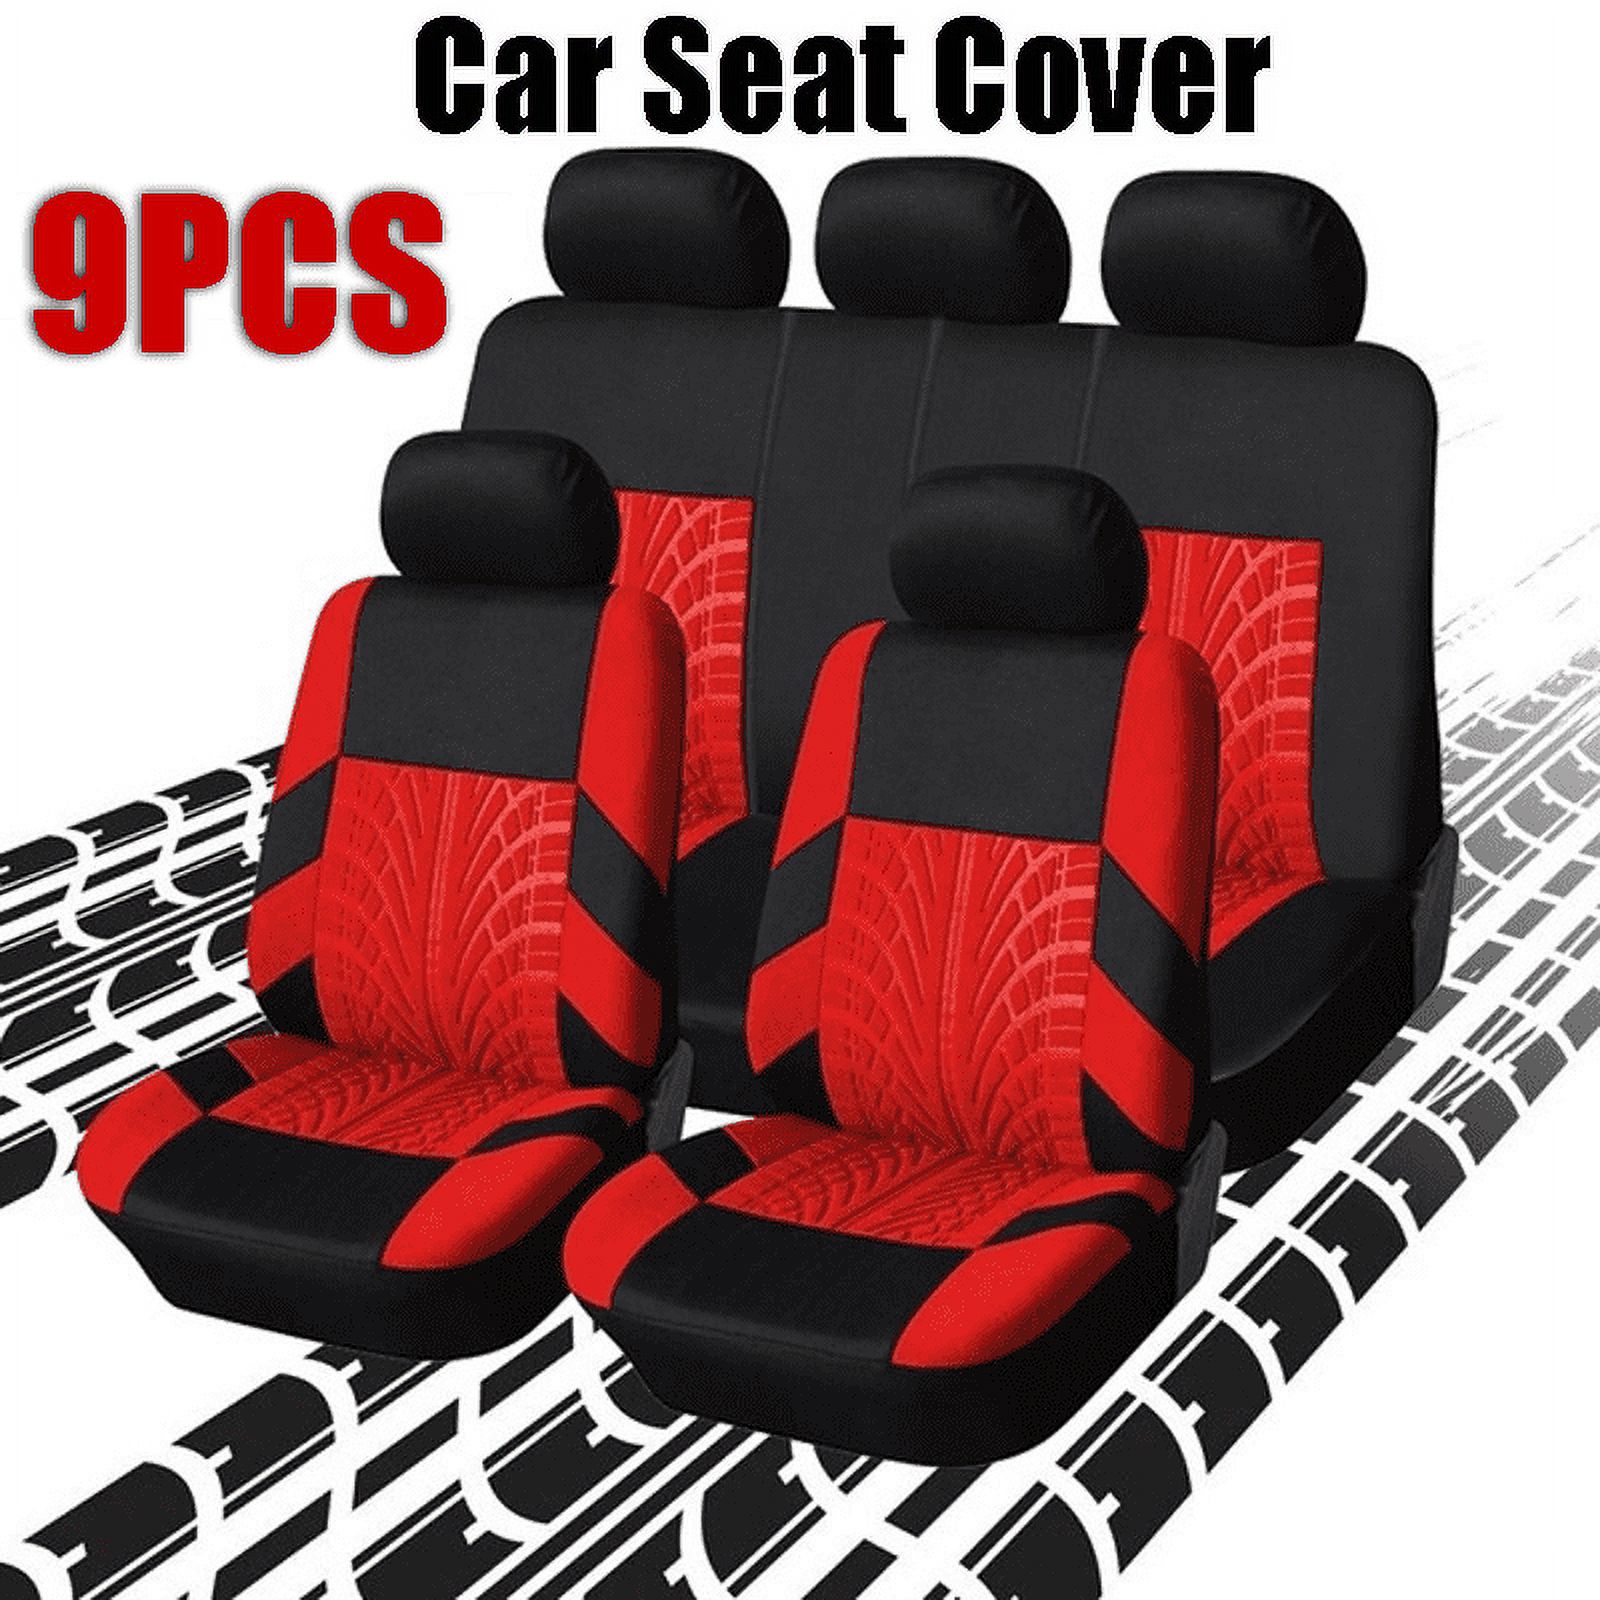 New 9PCS Universal Seat Covers for Car Full Car Seat Cover Car Cushion Case Cover Front Car Seat Cover Car Accessories Car Seats - image 1 of 8